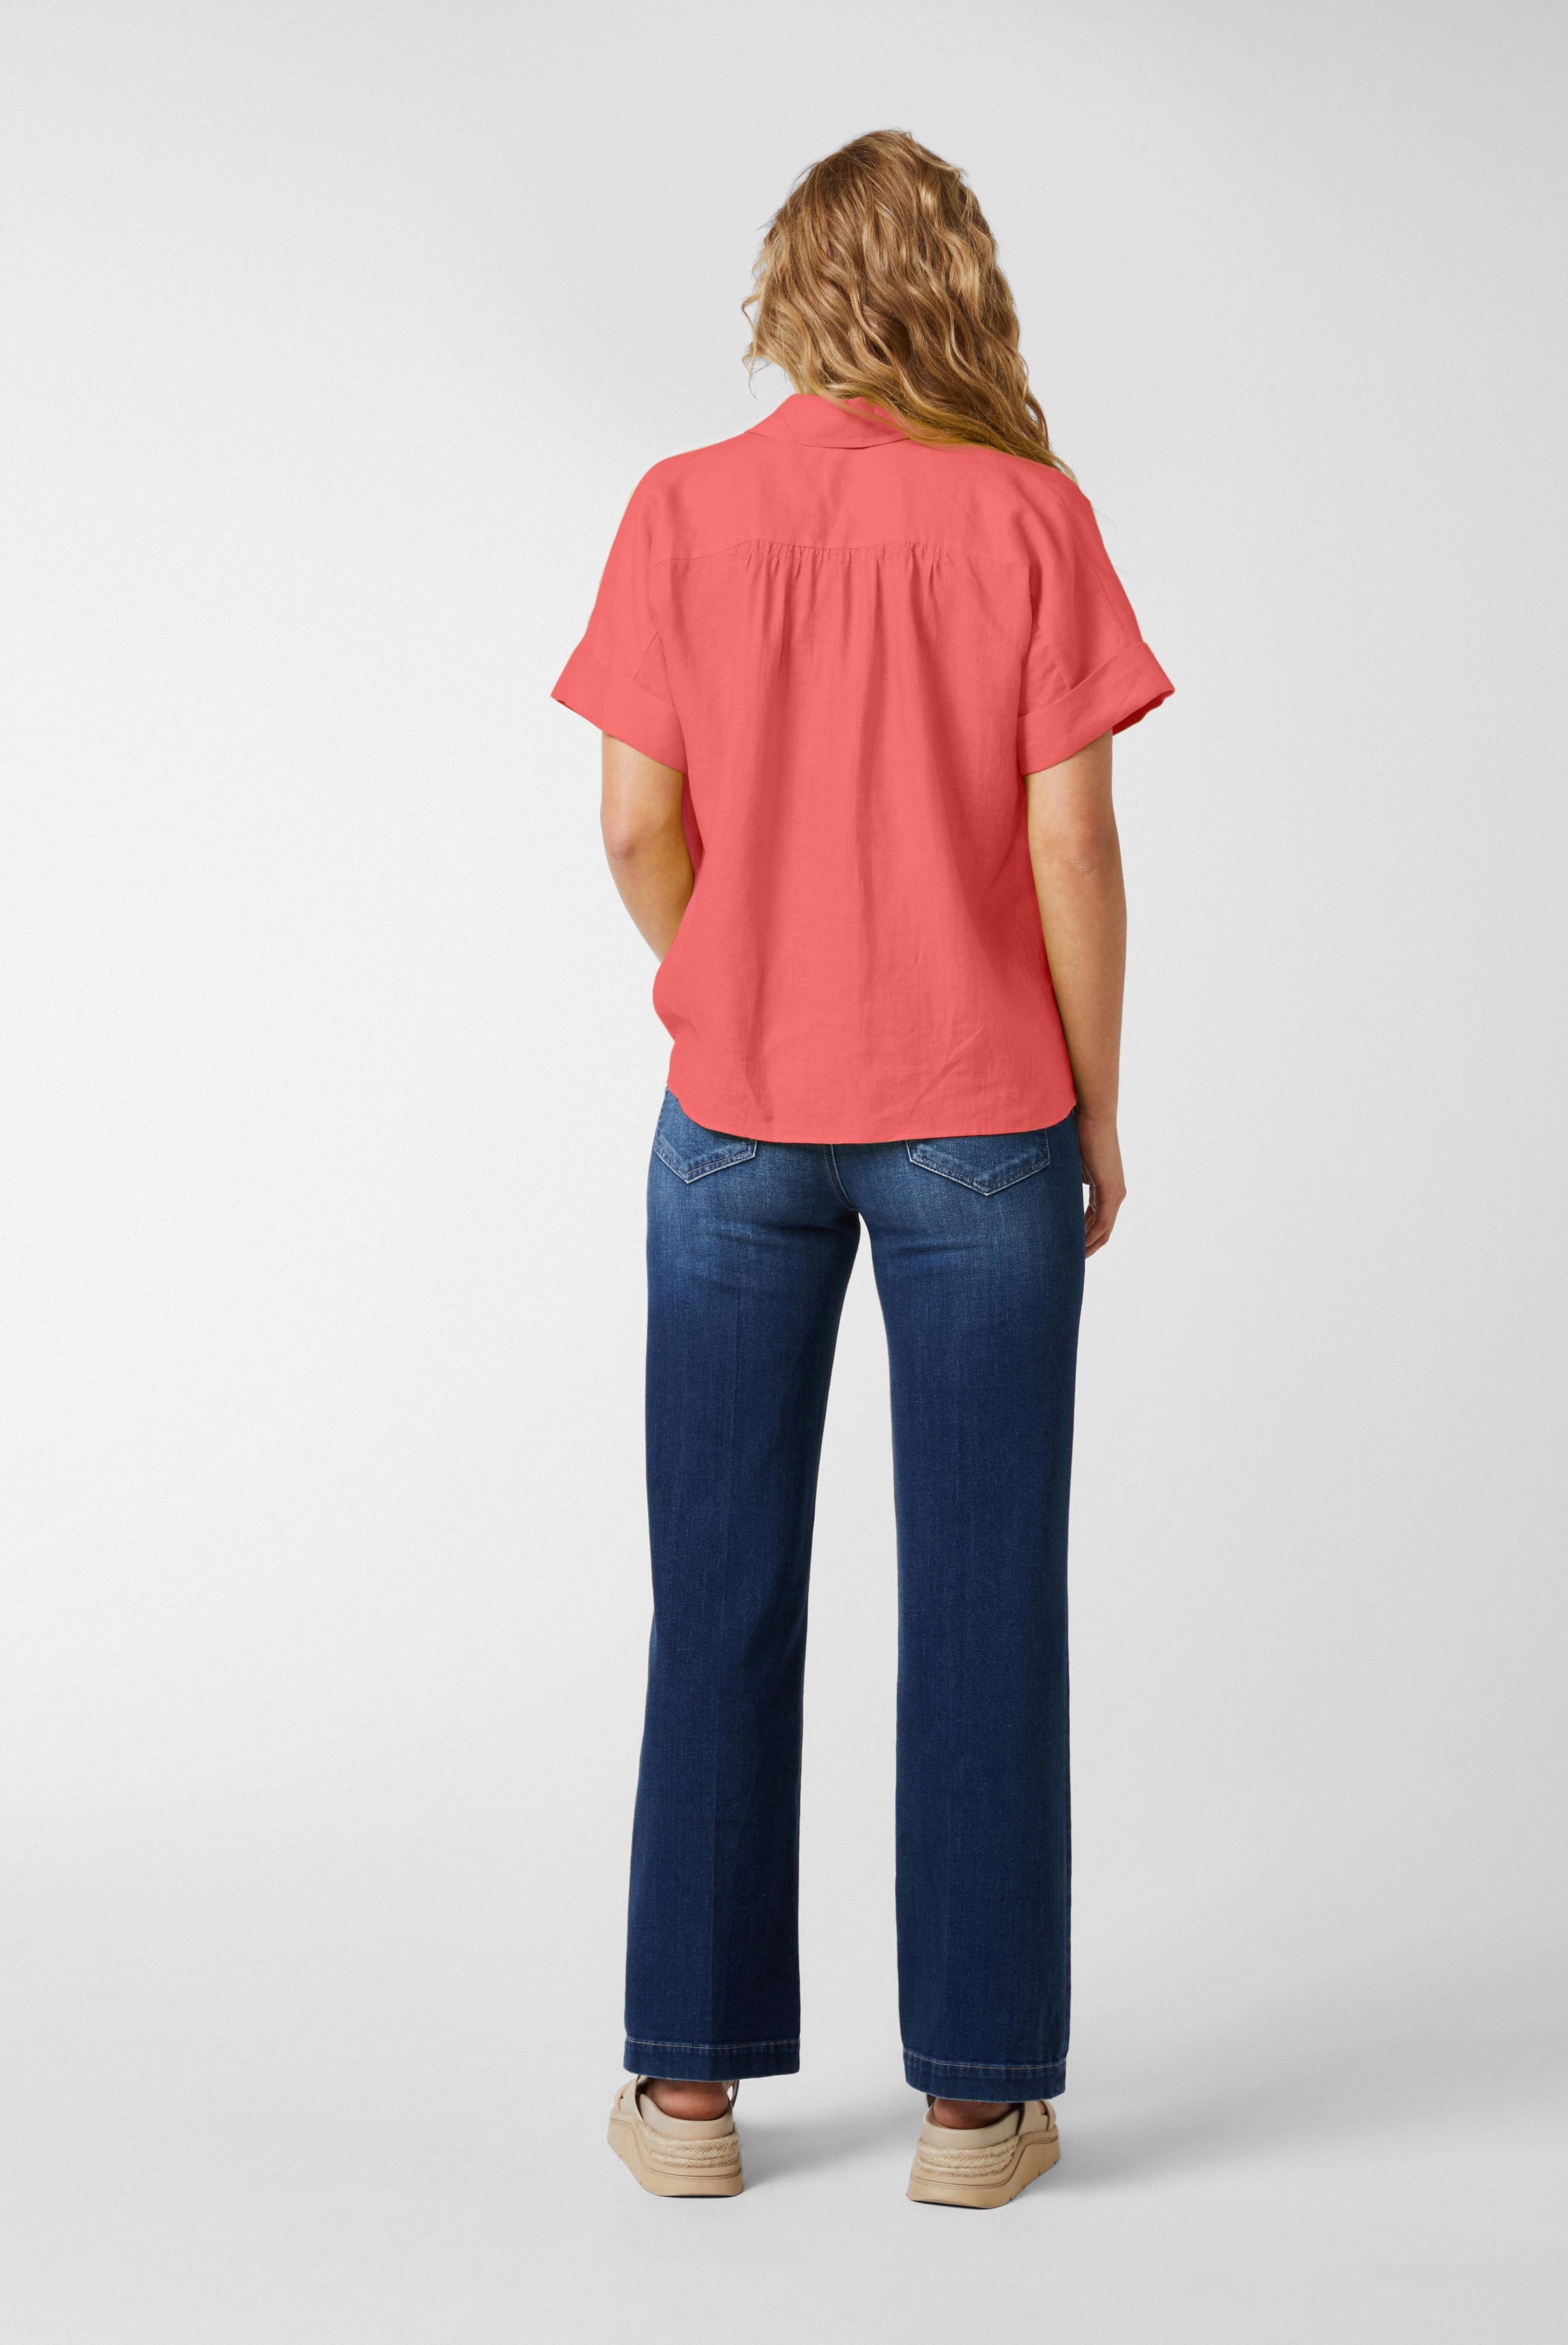 Casual Blouses+Short-Sleeved Blouse made of Upper Linen+05.525R.P8.150555.440.34